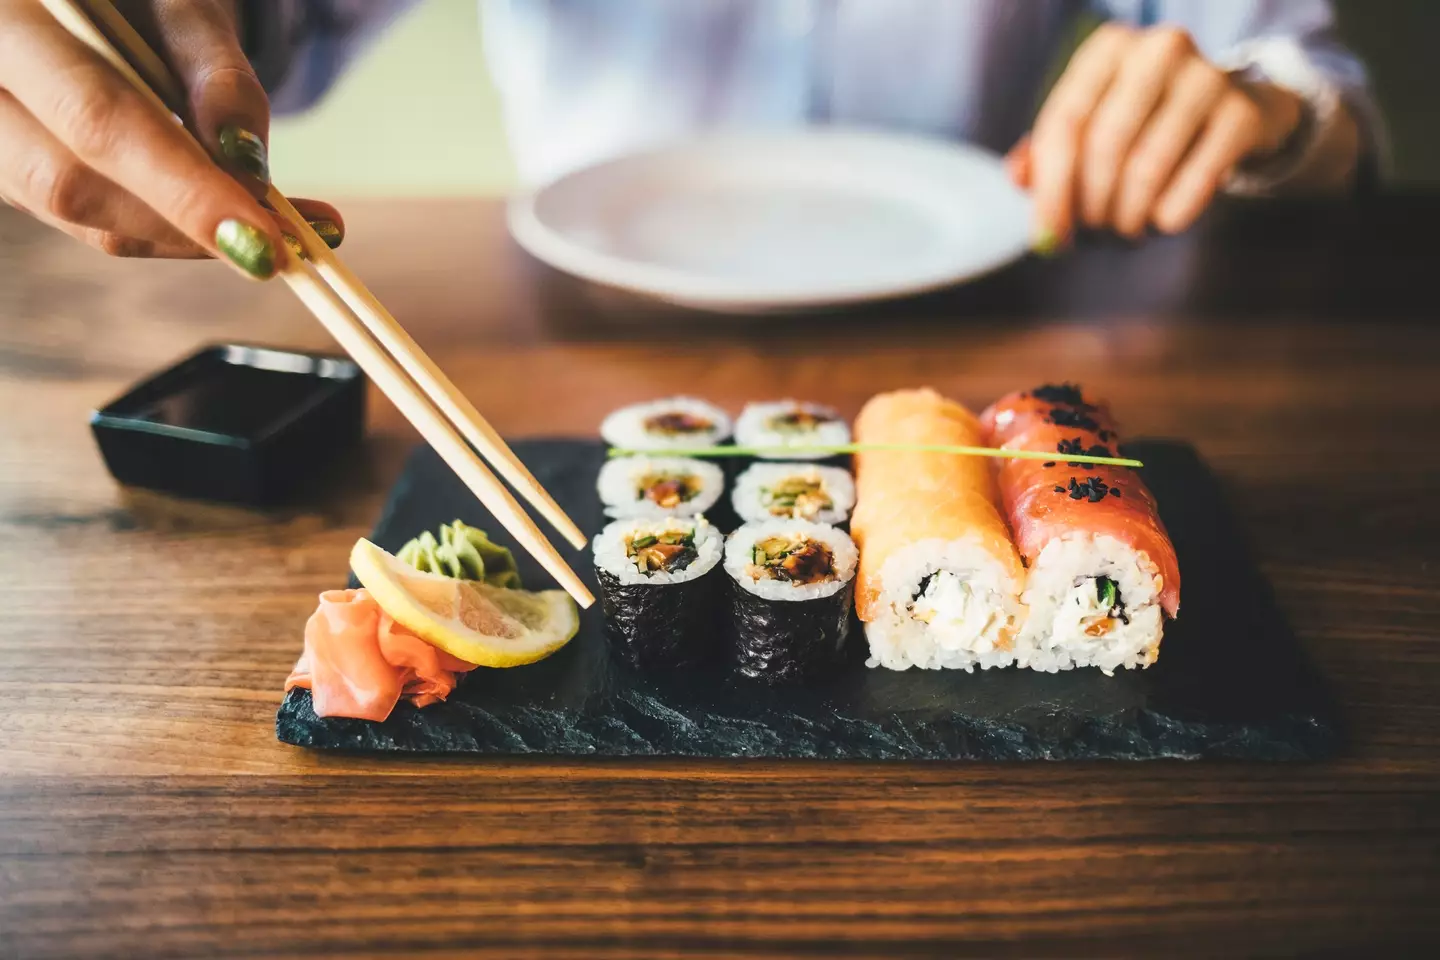 One influencer was recently left disappointed when she expected some free sushi.